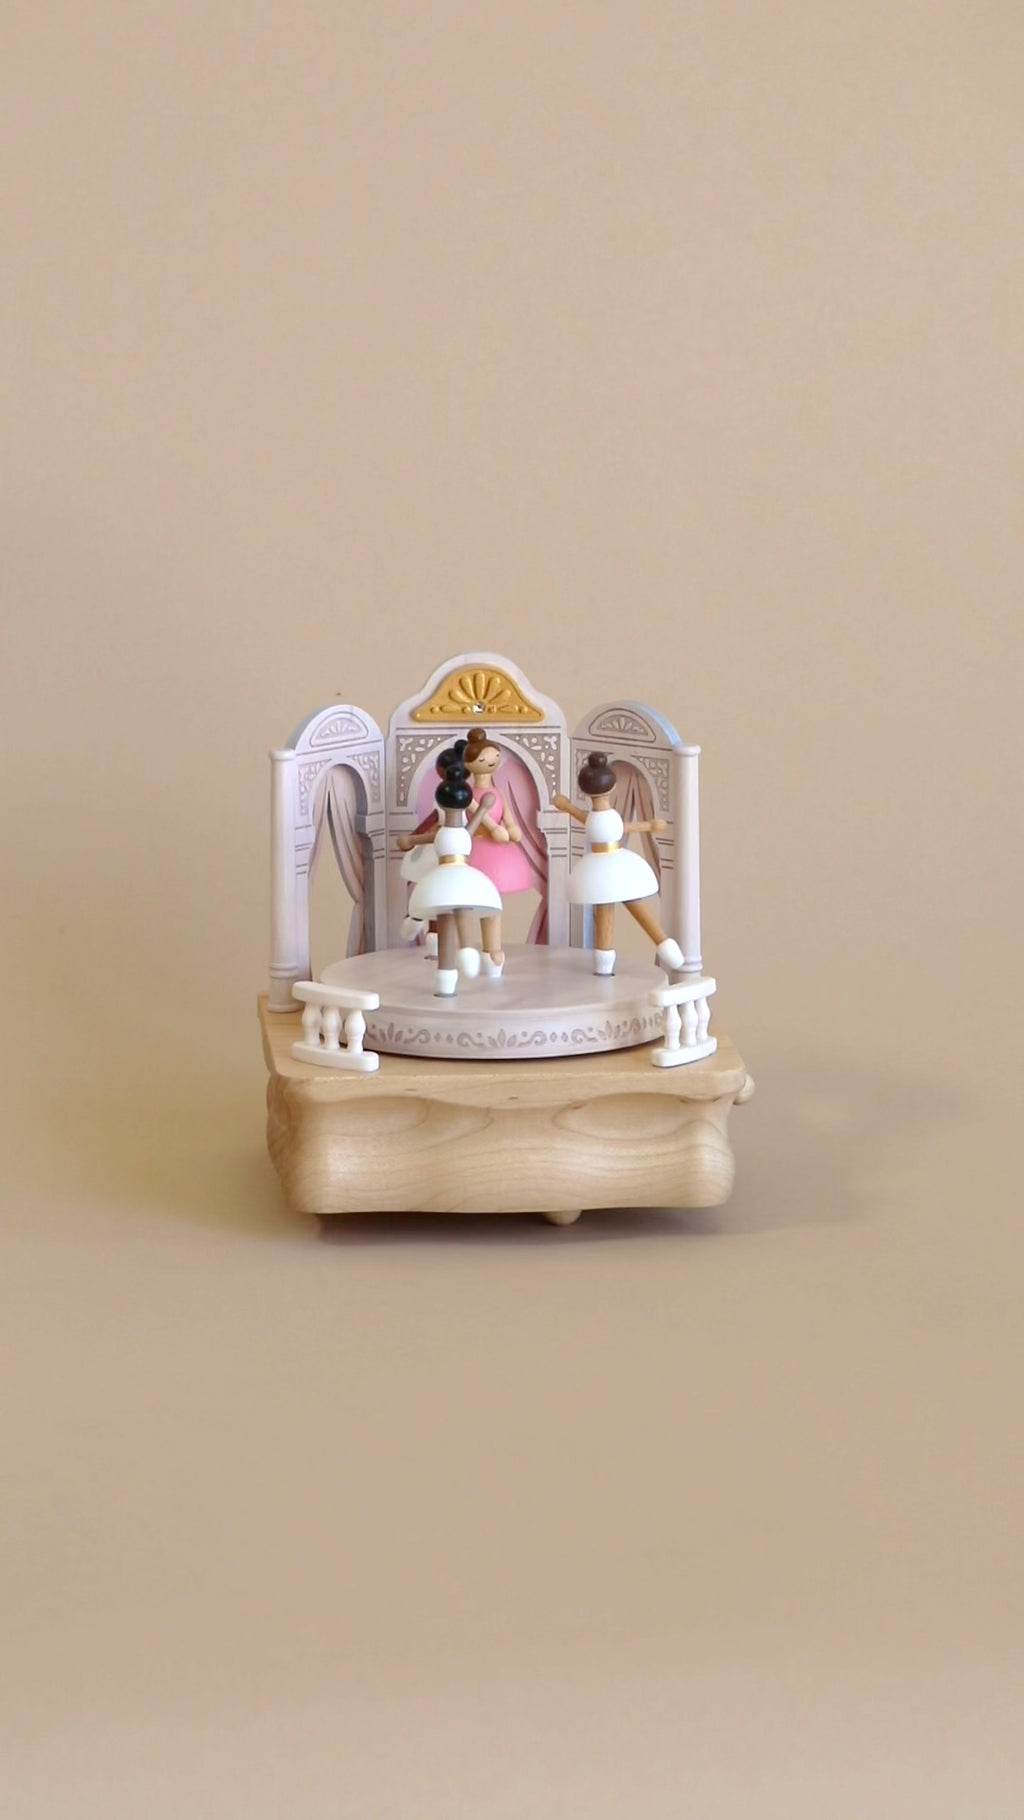 The wooden ballerina music box in motion with soft melody playing.